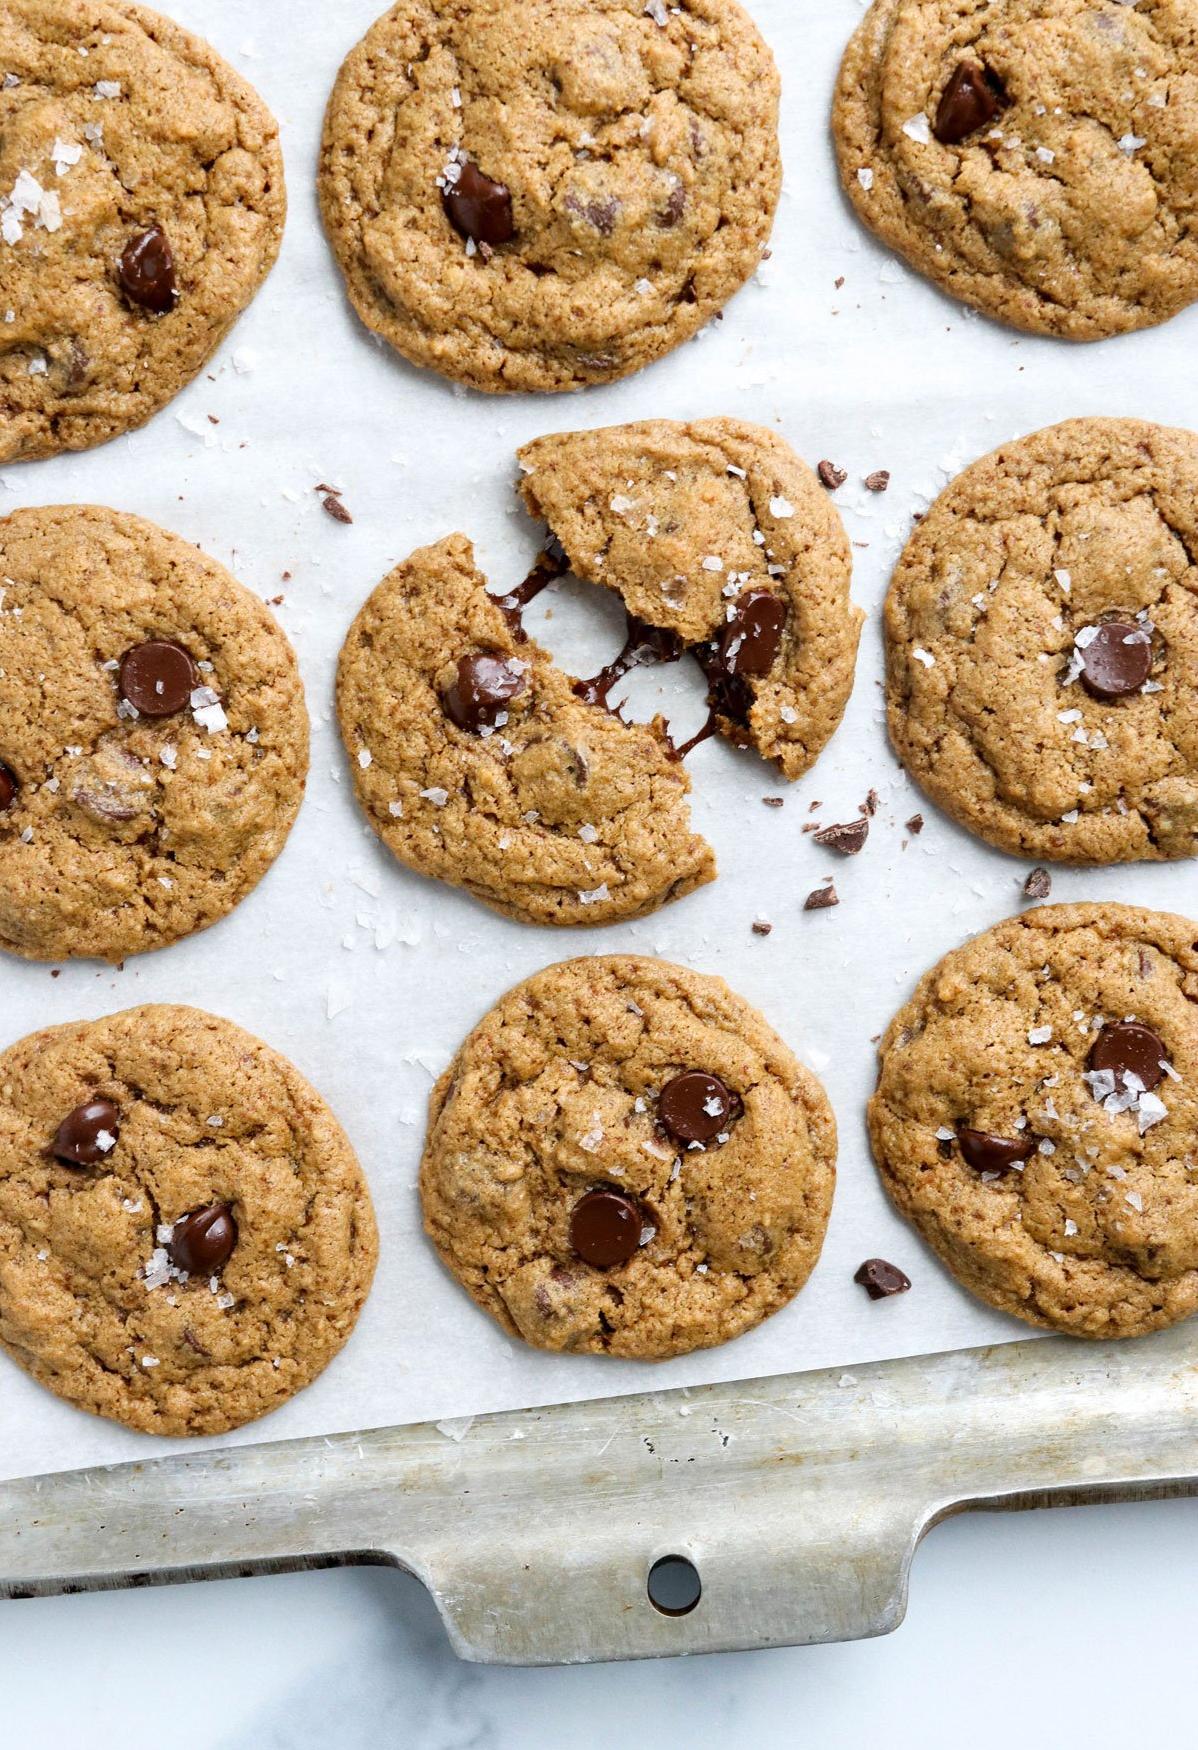  These cookies are easy to make and perfect for family gatherings or a cozy night in.